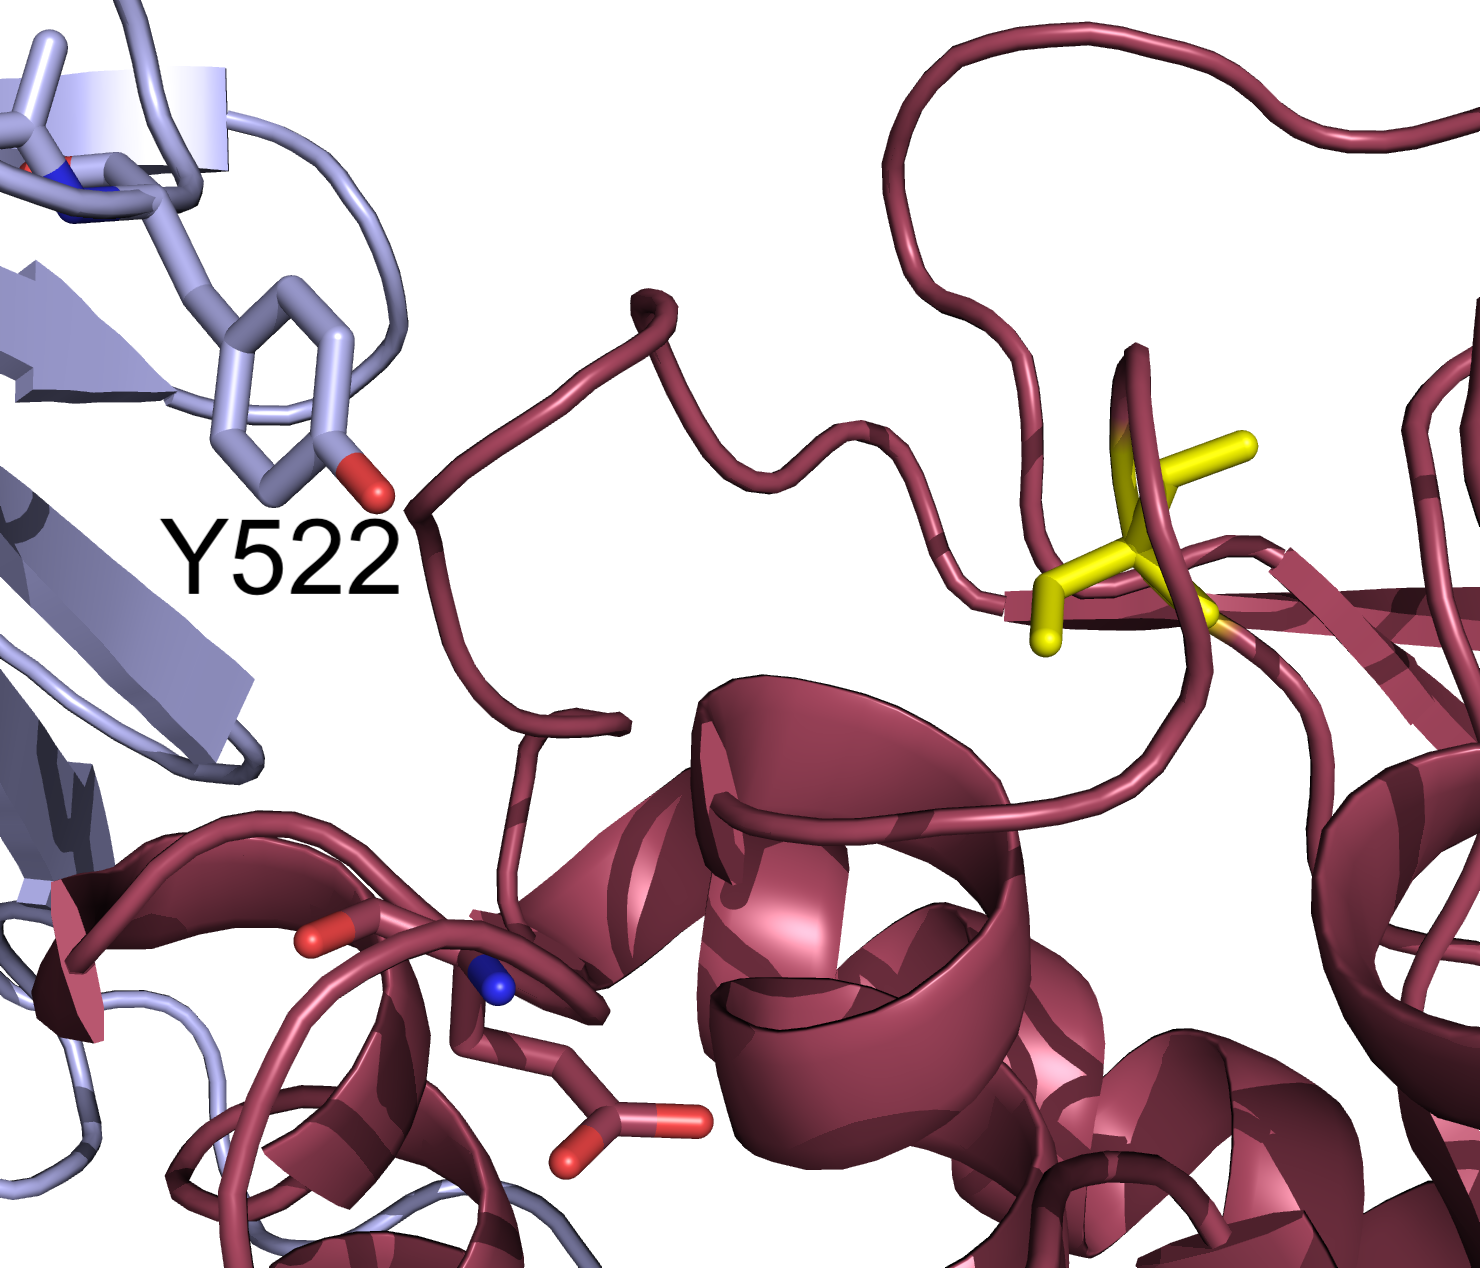 C2 domain amino acid sticking into the catalytic domain active site